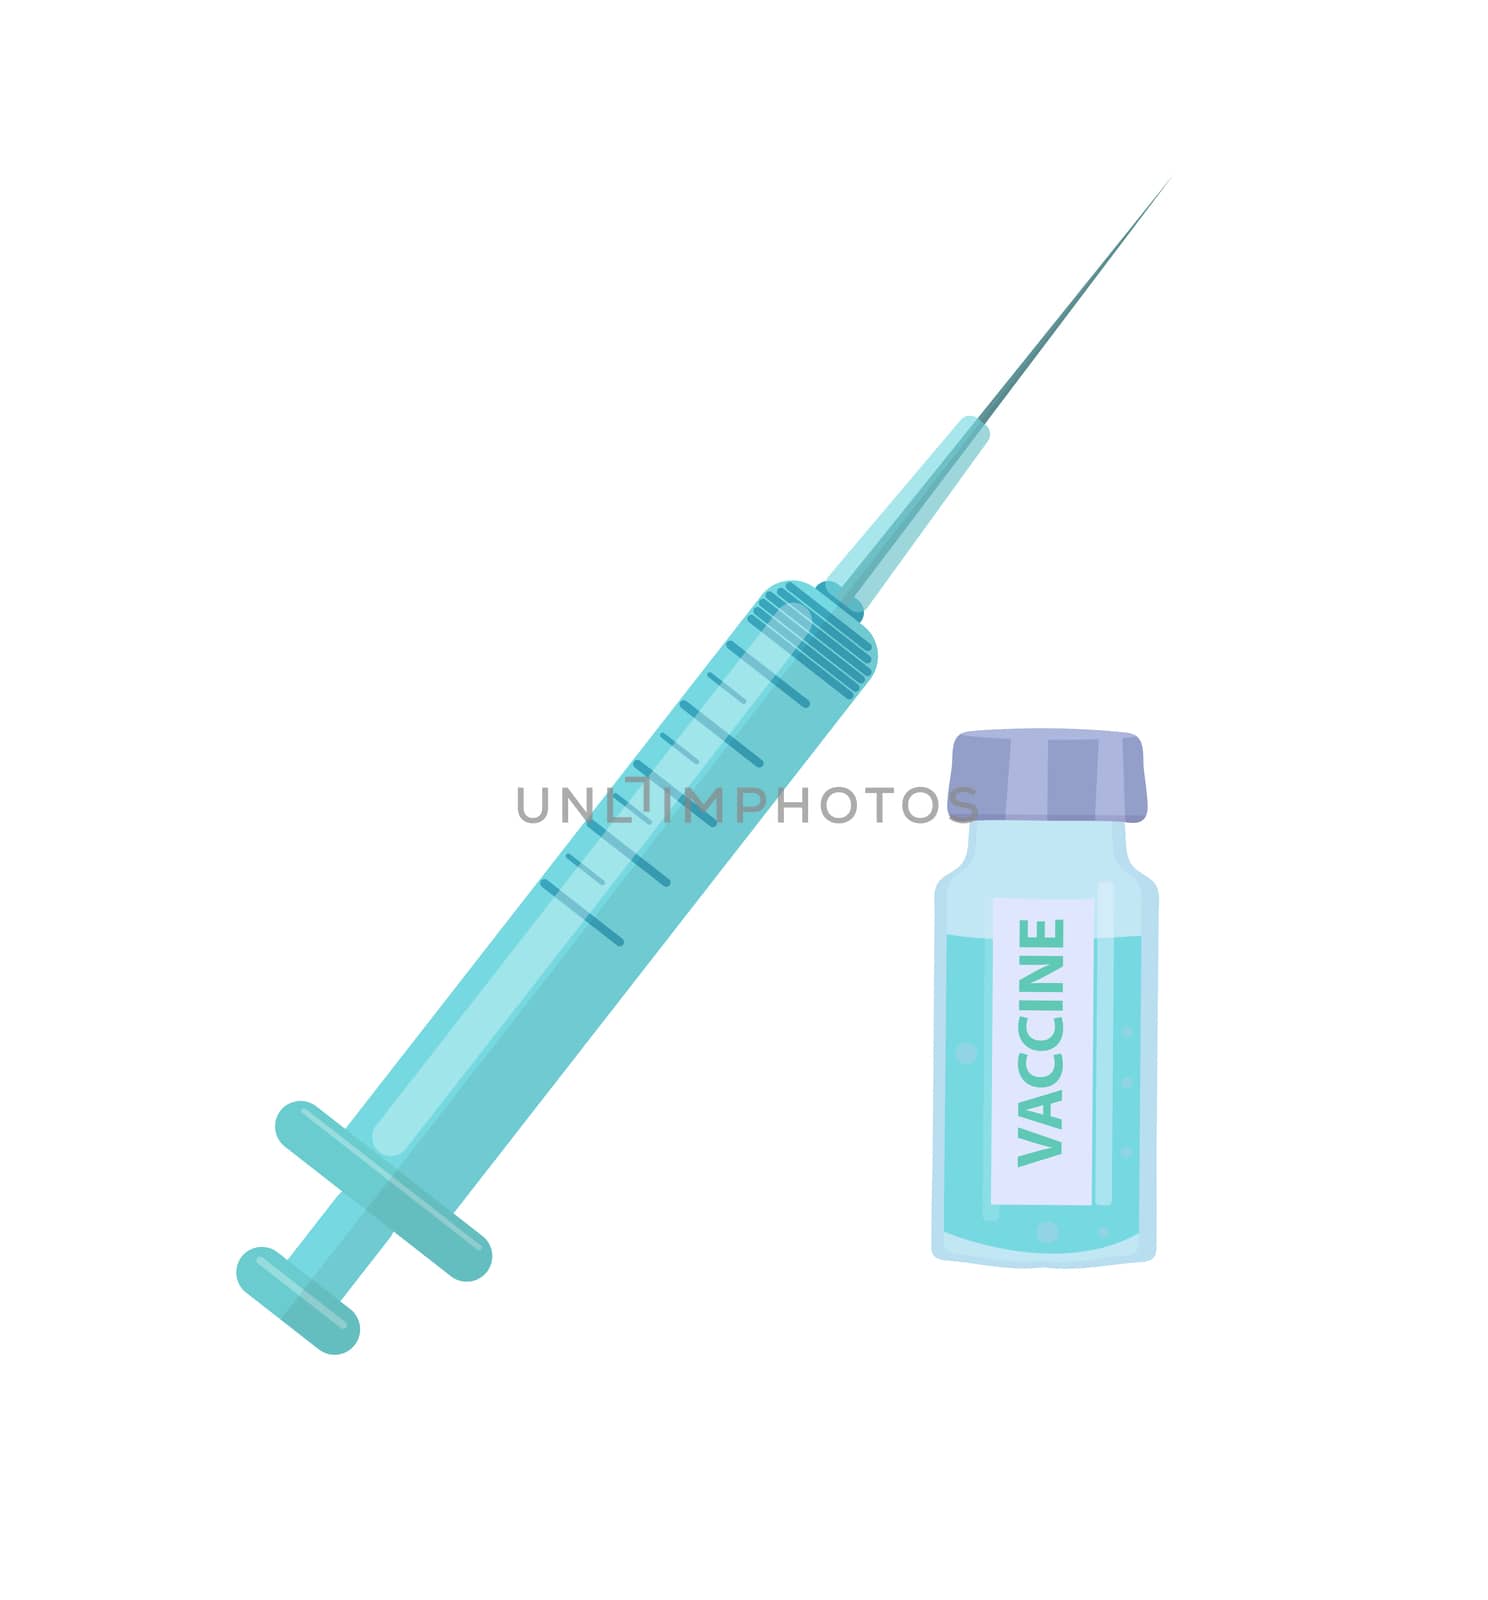 Vaccination protection against virus and disease. Syringe and glass jar with a vaccine, medicine concept icon flat style. Isolated on a white background. illustration by lucia_fox